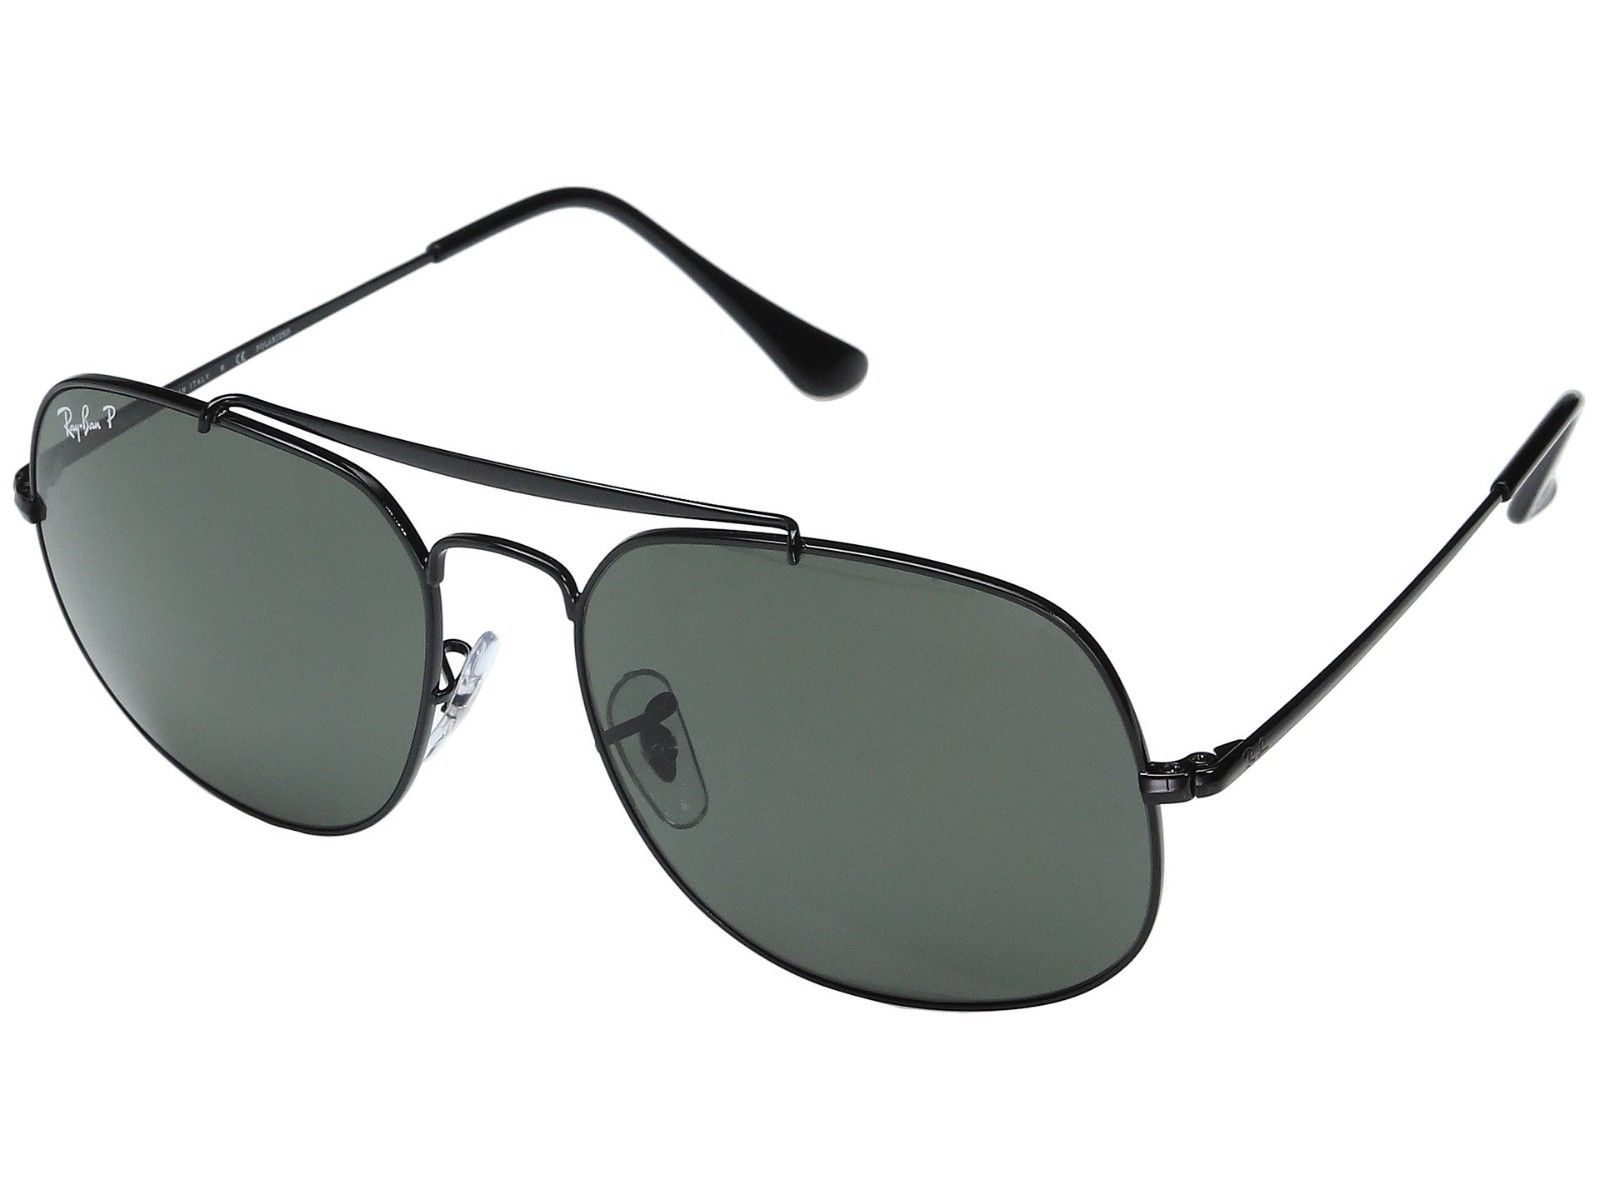 Ray-Ban 'The General' Black/Green Polarized Sunglasses! (RB3561 002/58)